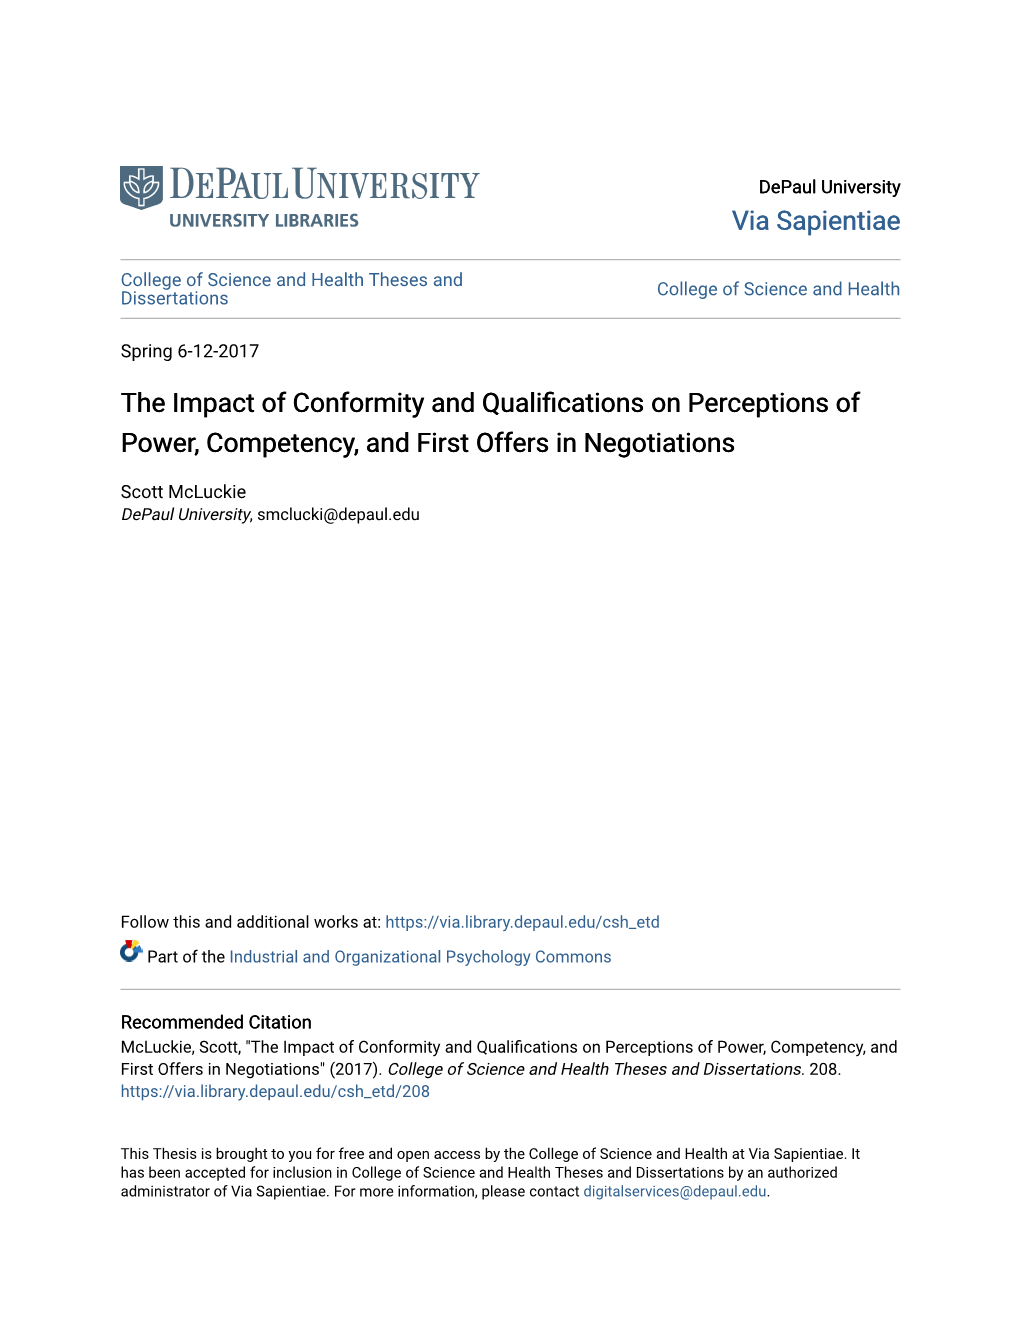 The Impact of Conformity and Qualifications on Perceptions of Power, Competency, and First Offers in Negotiations